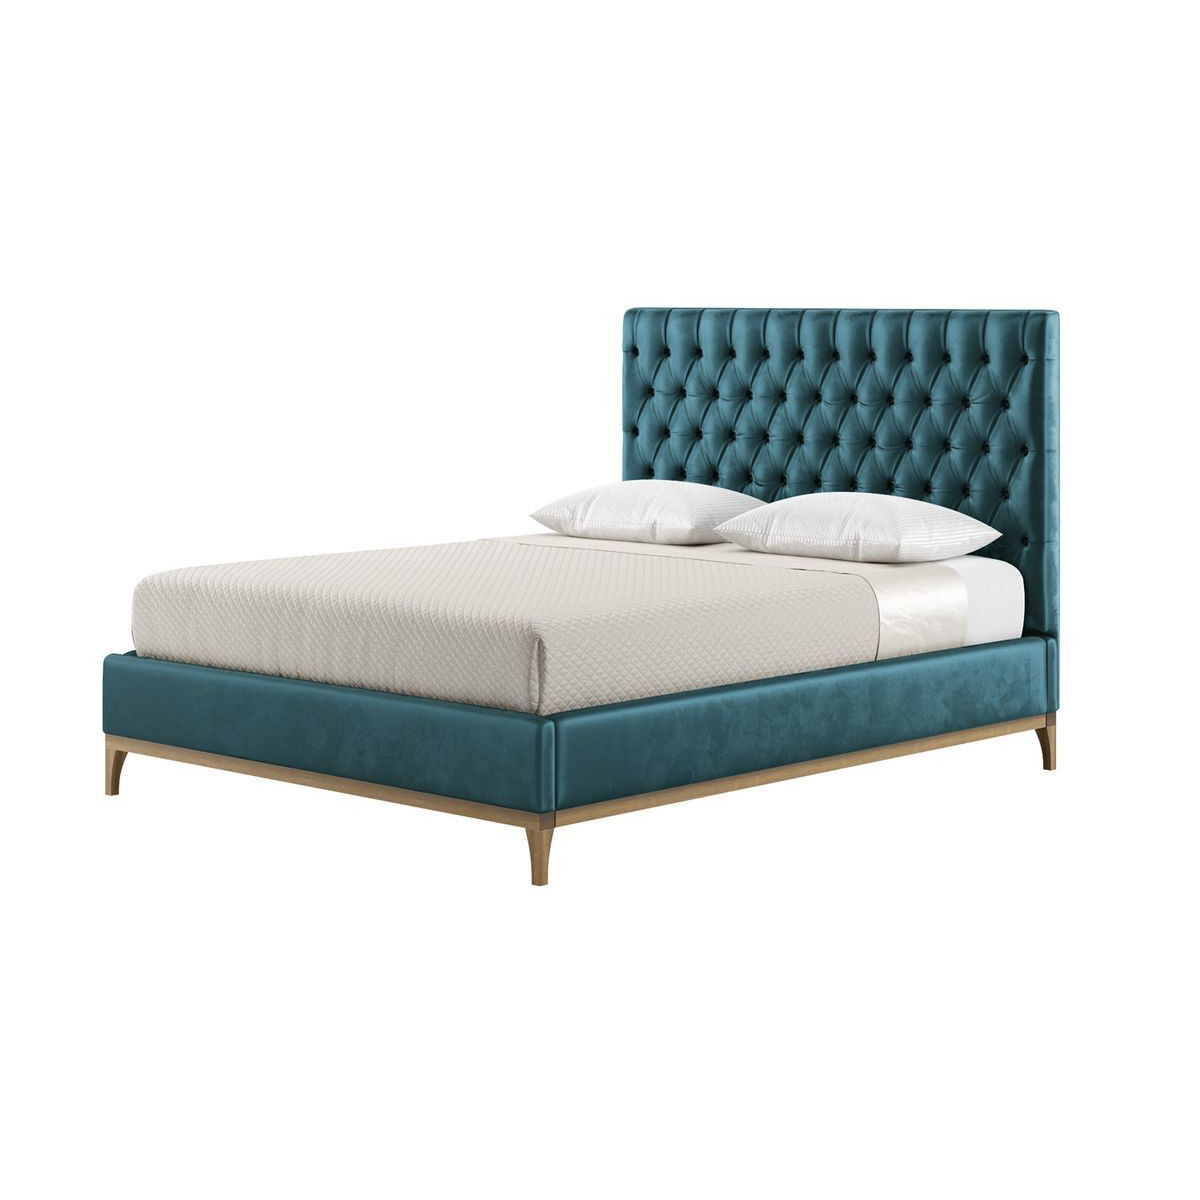 Marlon 5ft King Size Bed Frame with luxury deep button quilted headboard, dirty blue, Leg colour: wax black - image 1